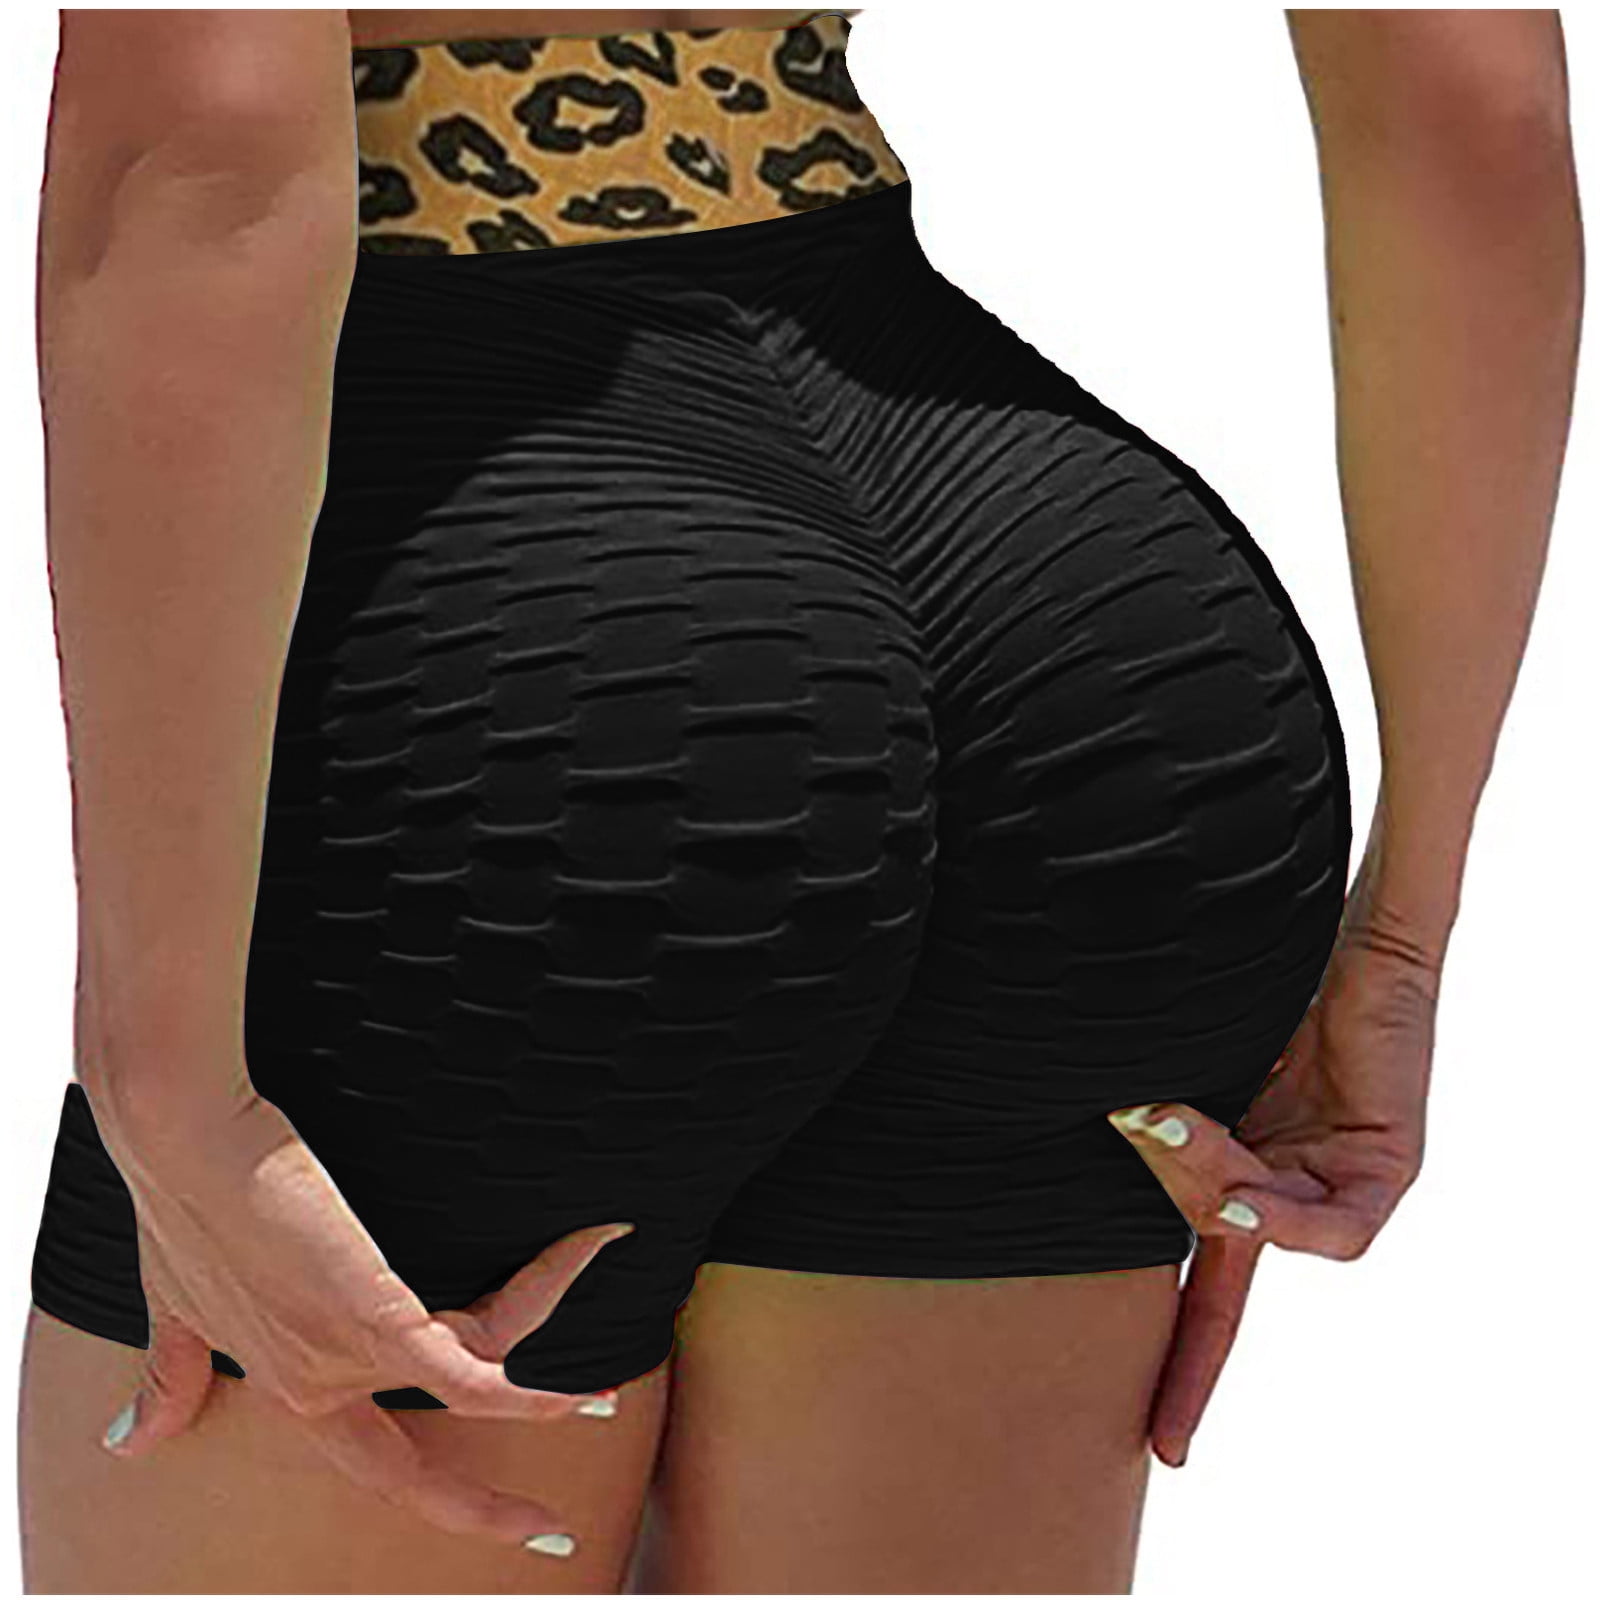 Booty Shorts for Women Casual Summer Fitness Cheeky Hot Pants Athletic Gym  Yoga Booty Shorts Stretchy Dance Pants